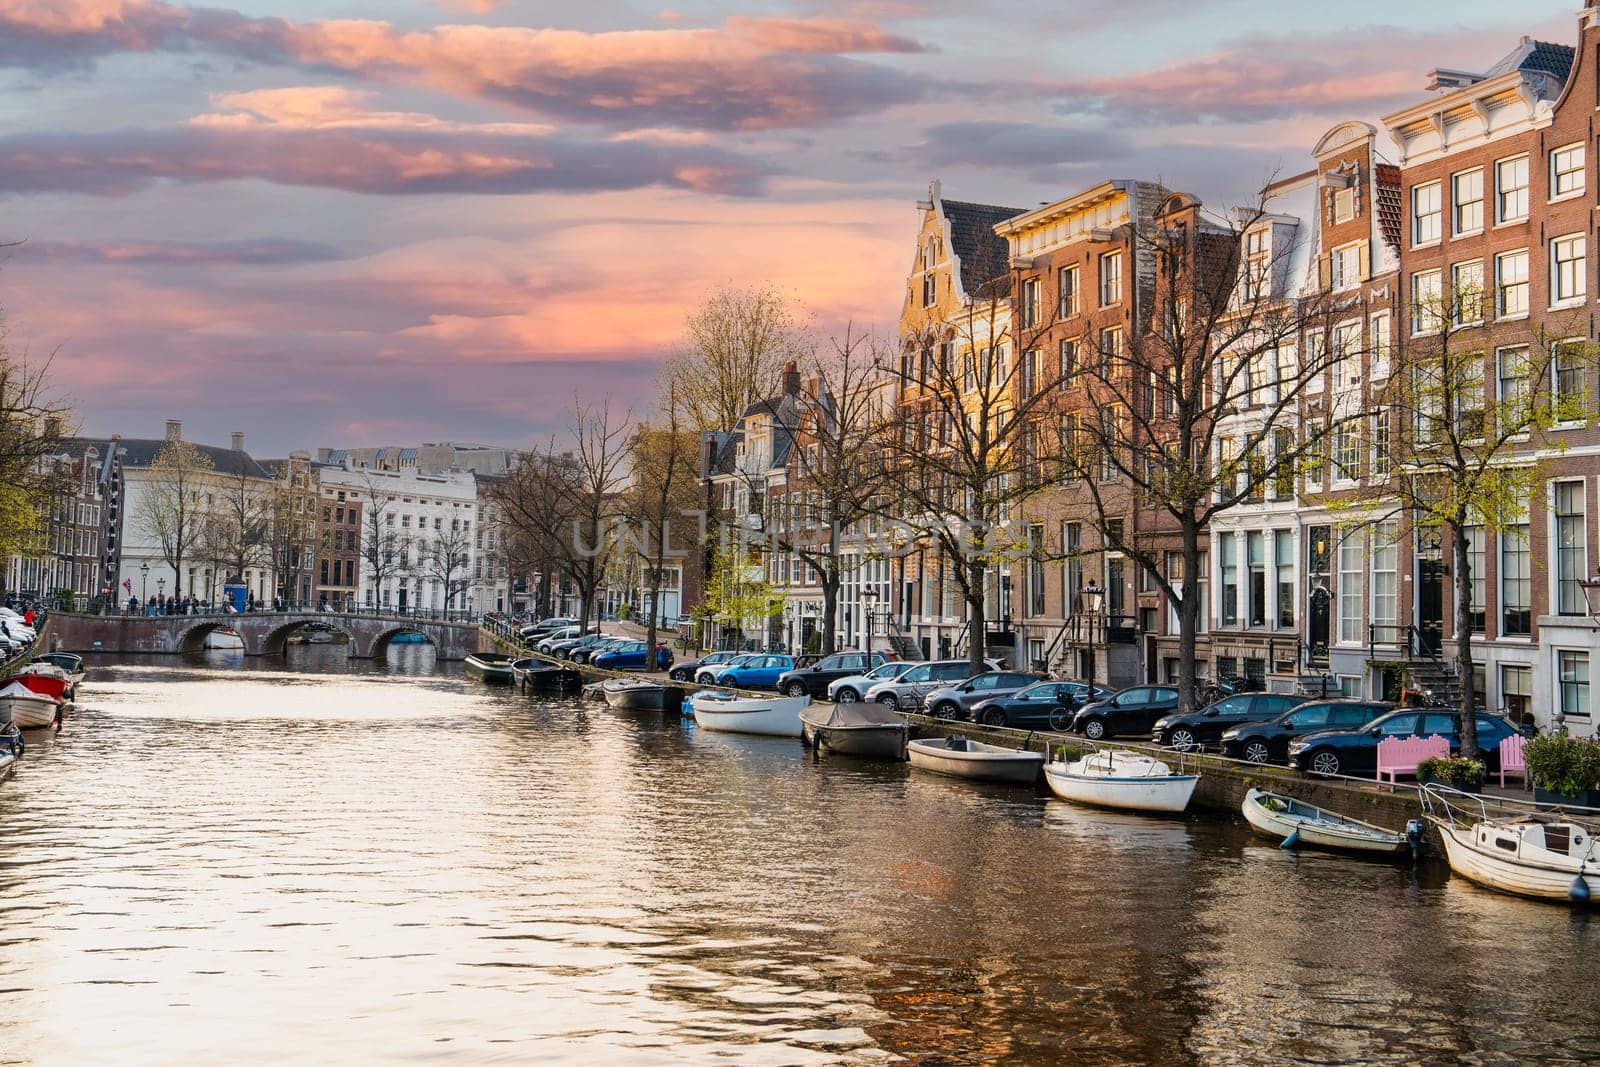 Scenic Amsterdam Canals with Colorful Houses in the Historic District by PhotoTime